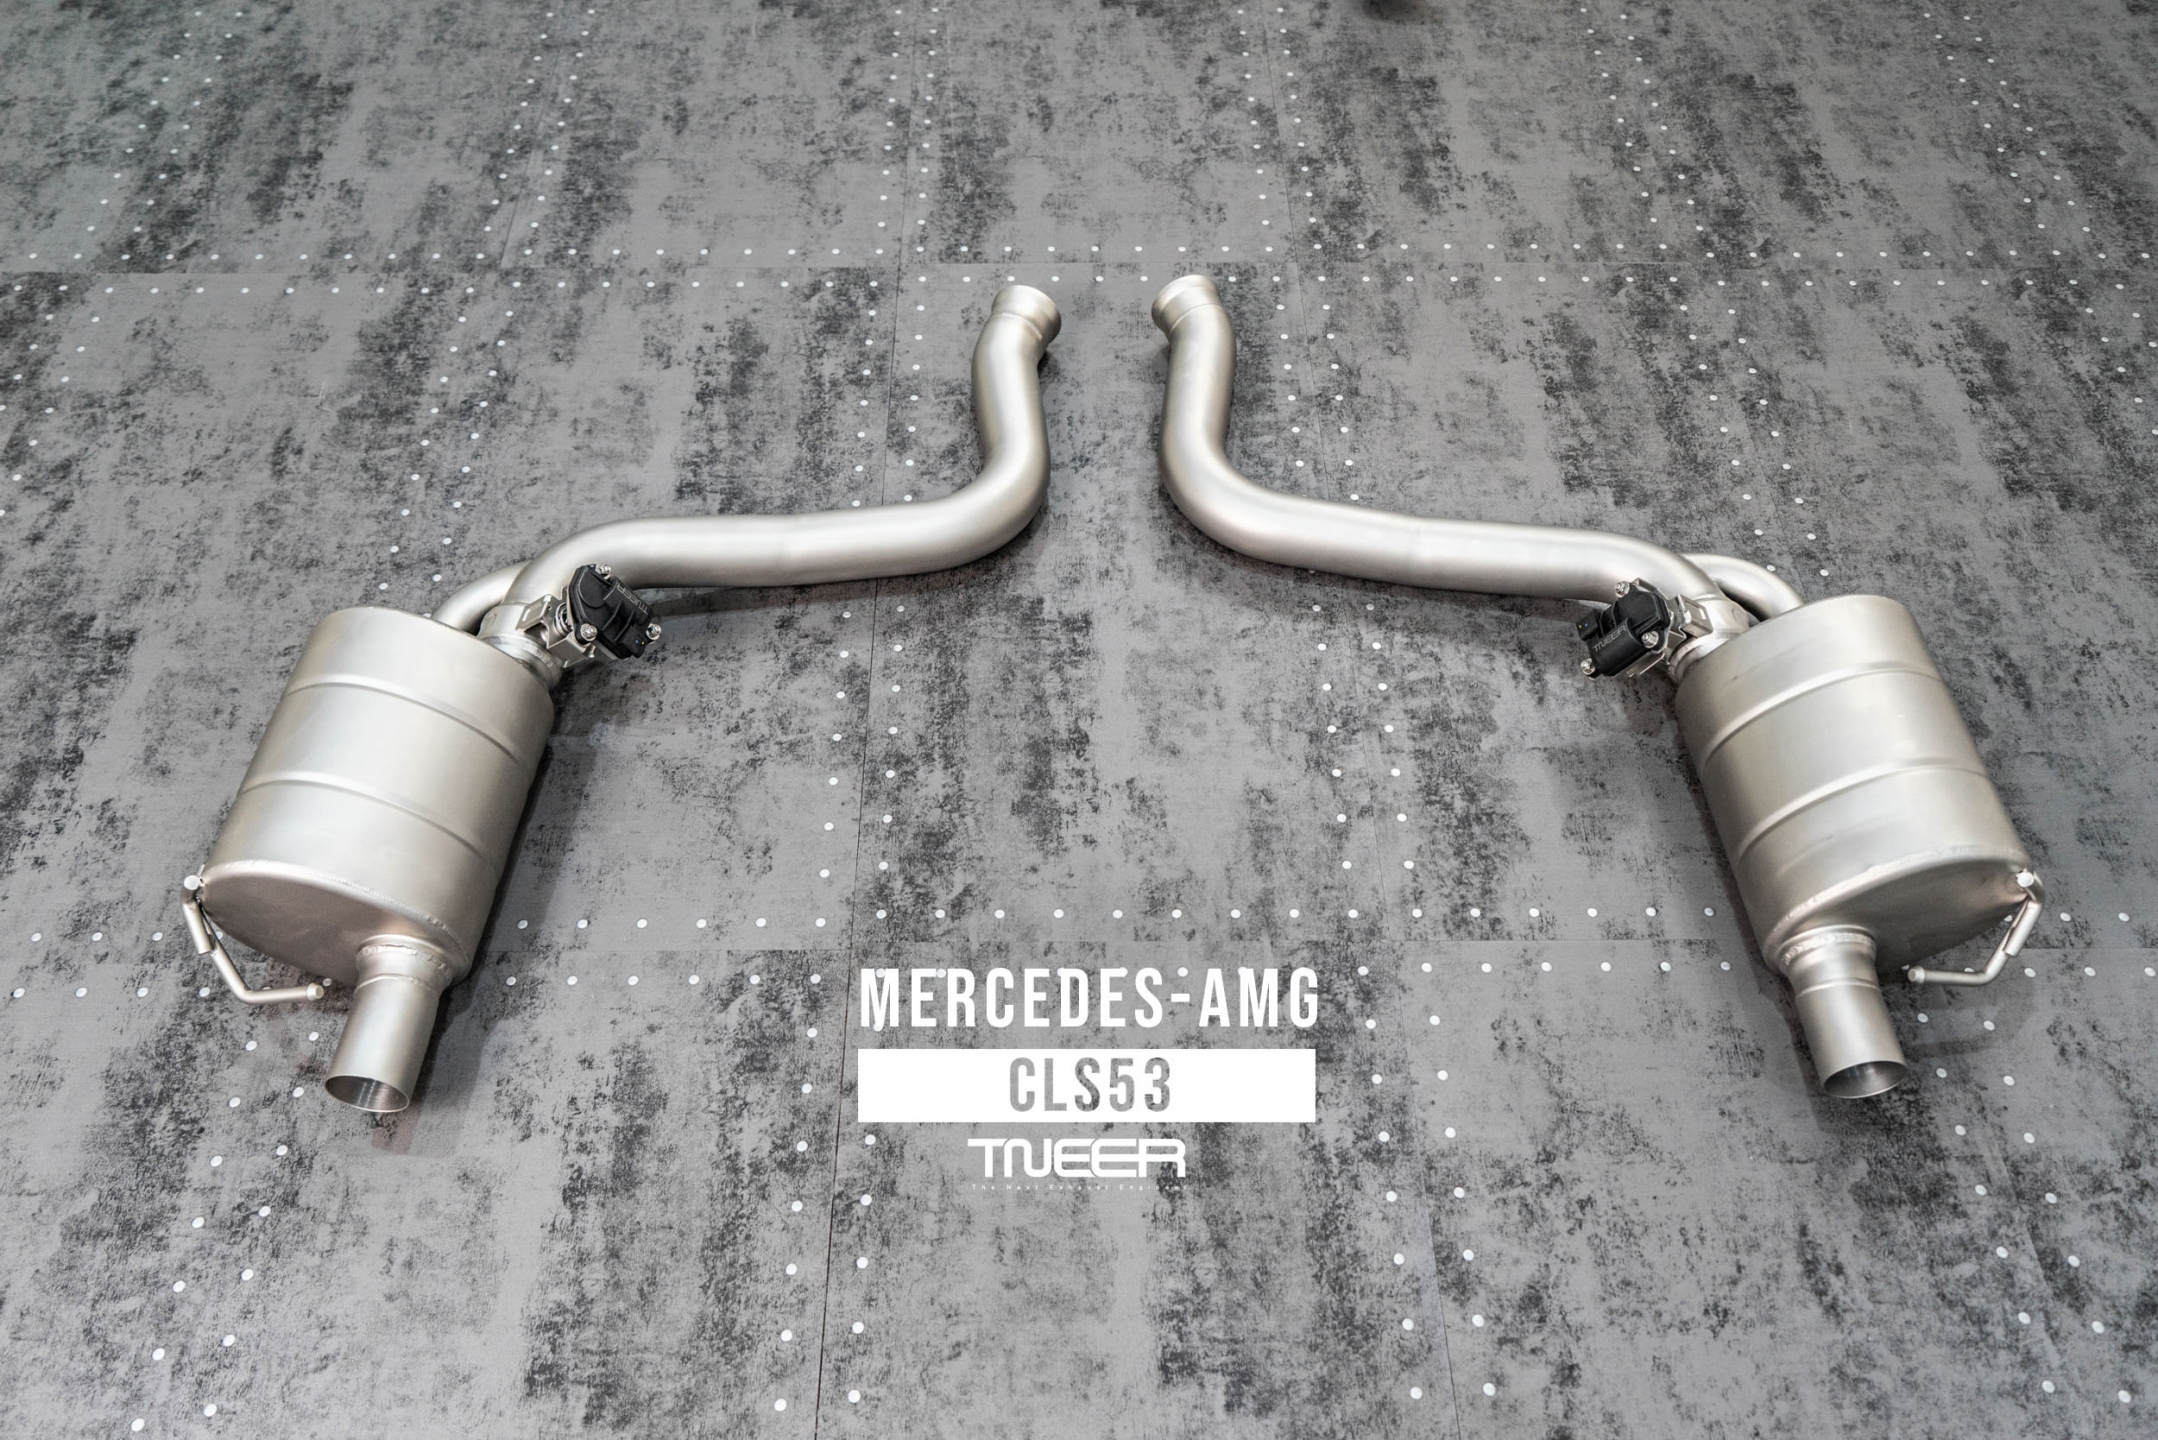 Mercedes-AMG C257 CLS53 LHD TNEER Performance Exhaust System